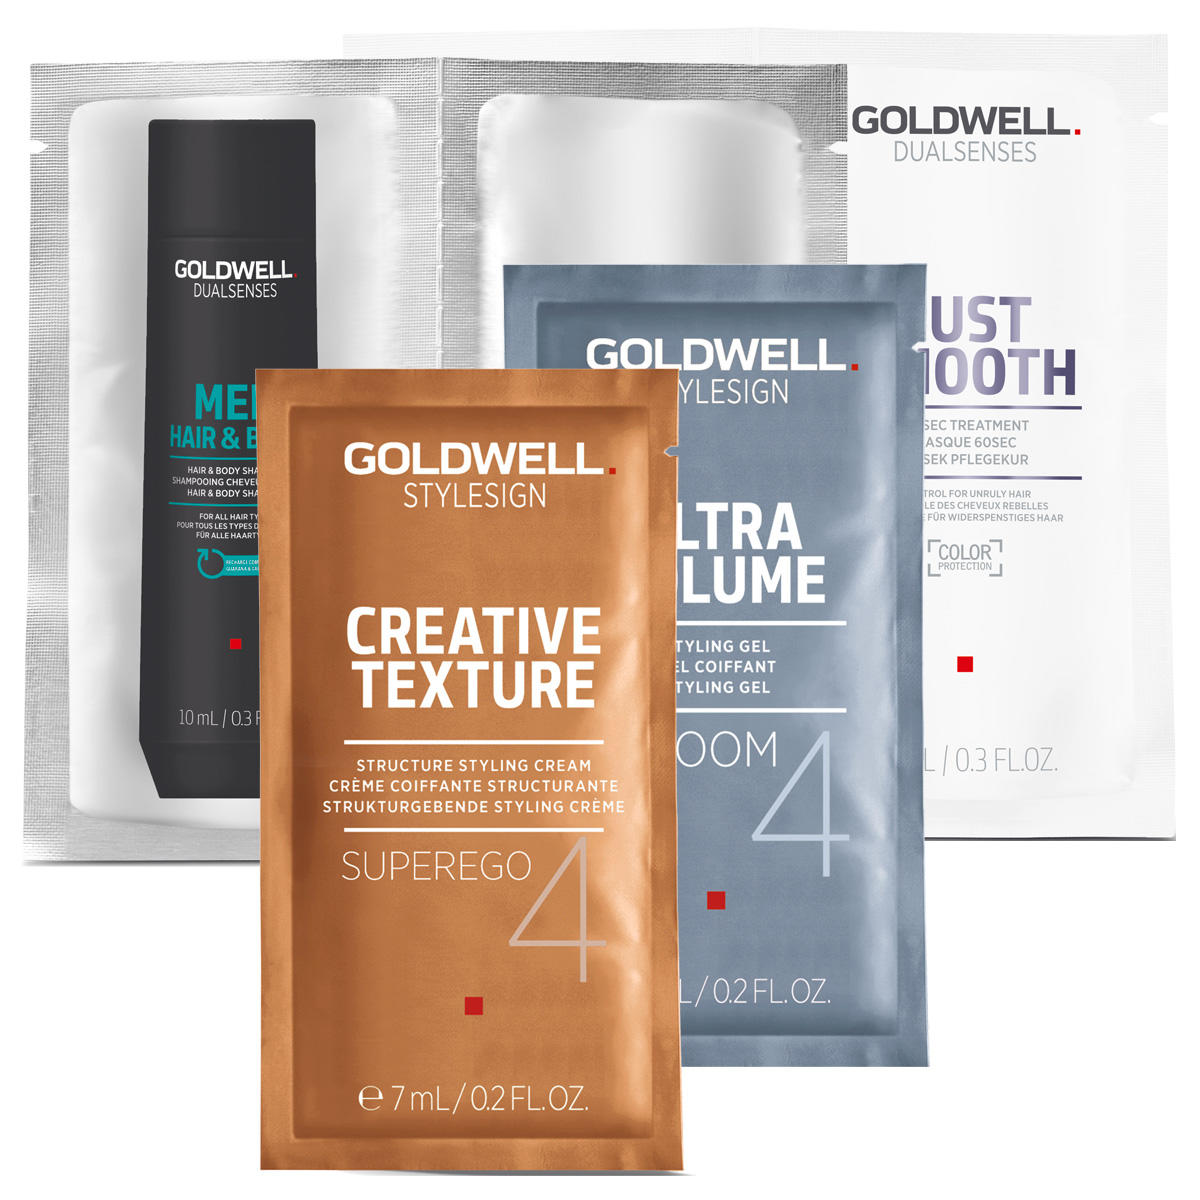 Goldwell Hair care products 7 ml assorted, one sachet